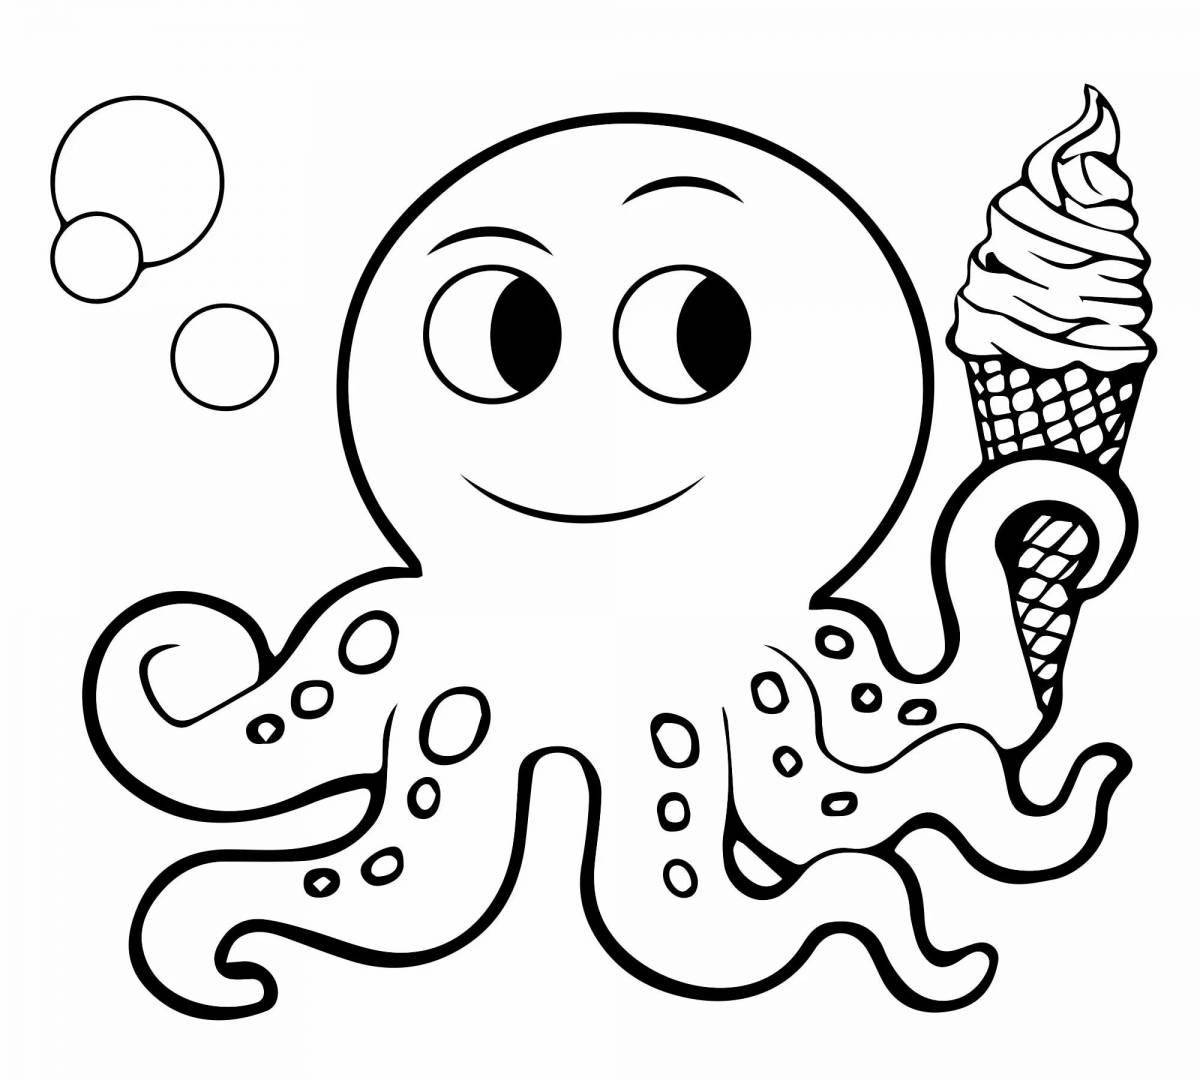 A fun octopus coloring book for kids